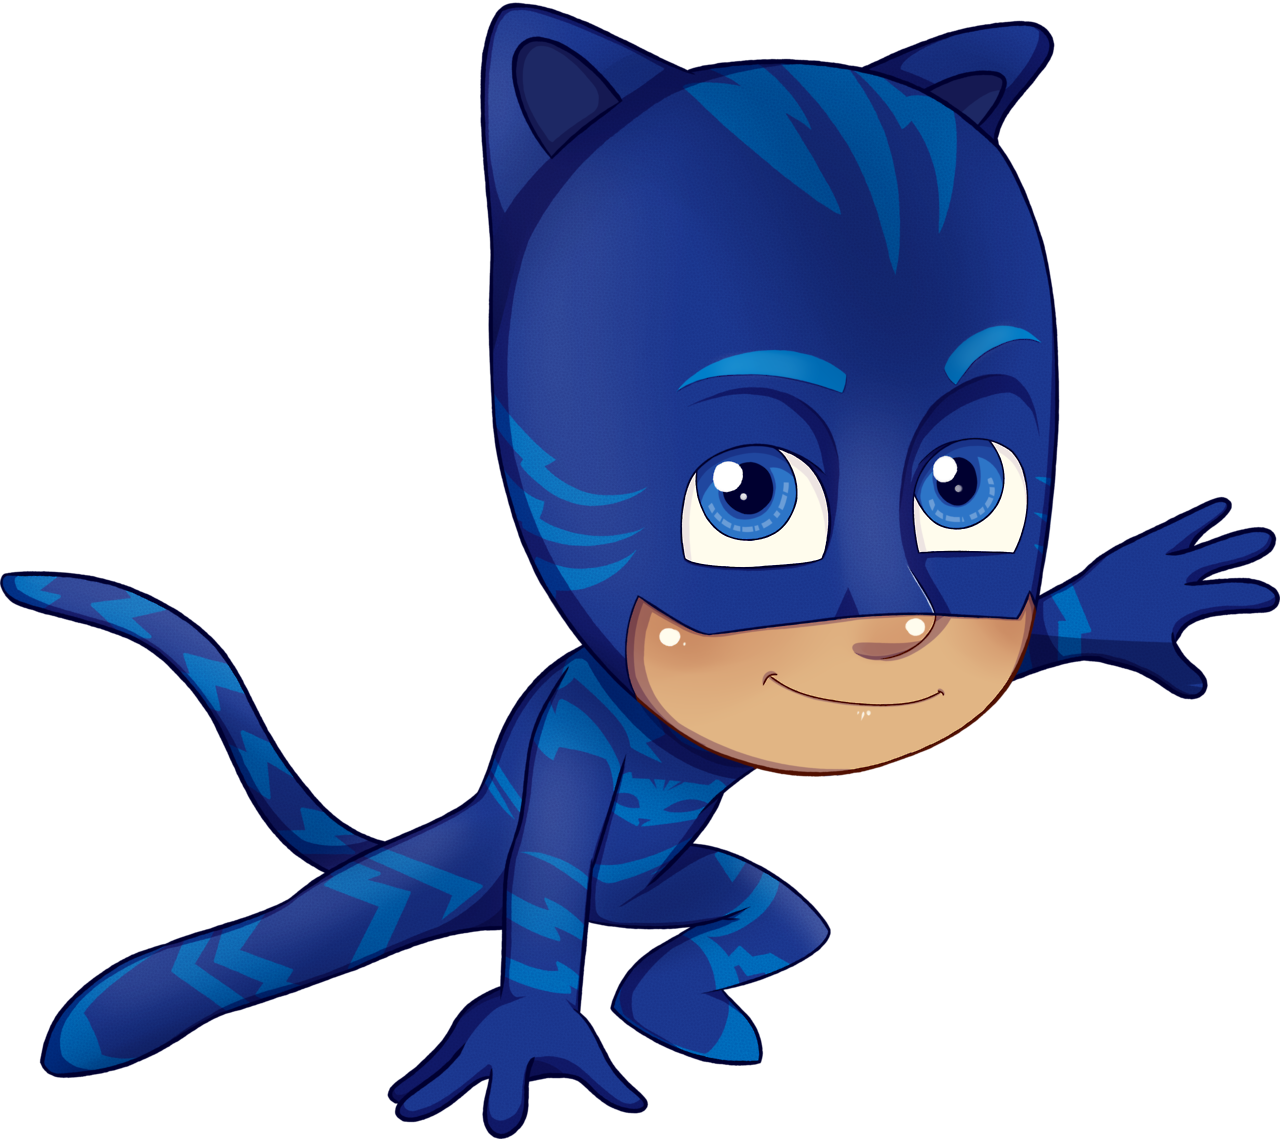 Download and share clipart about Pj Masks Catboy Png, Find more high qualit...